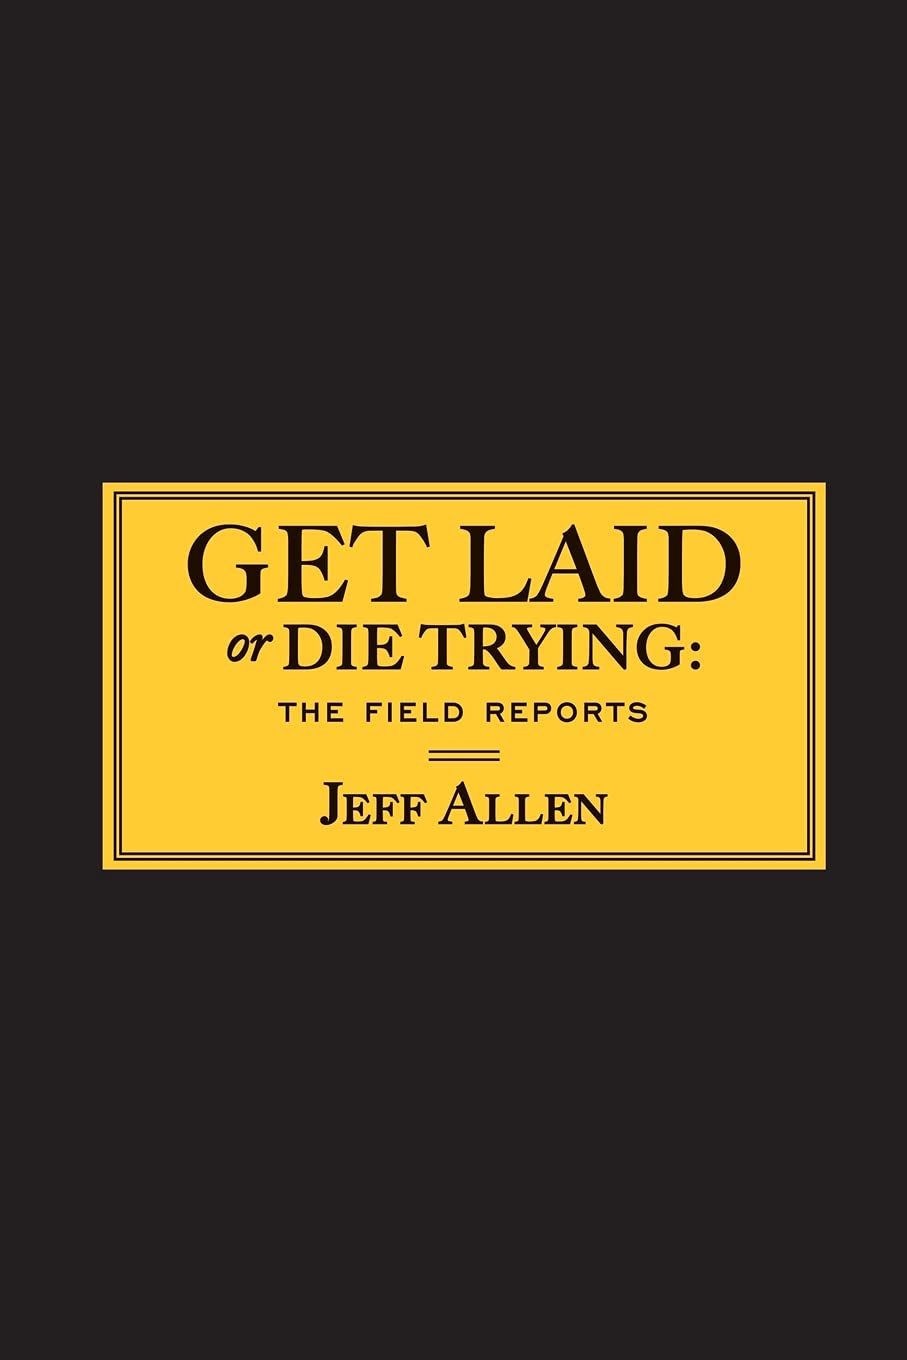 The Jeffy Allen Show 2 - Get Laid or Die Trying